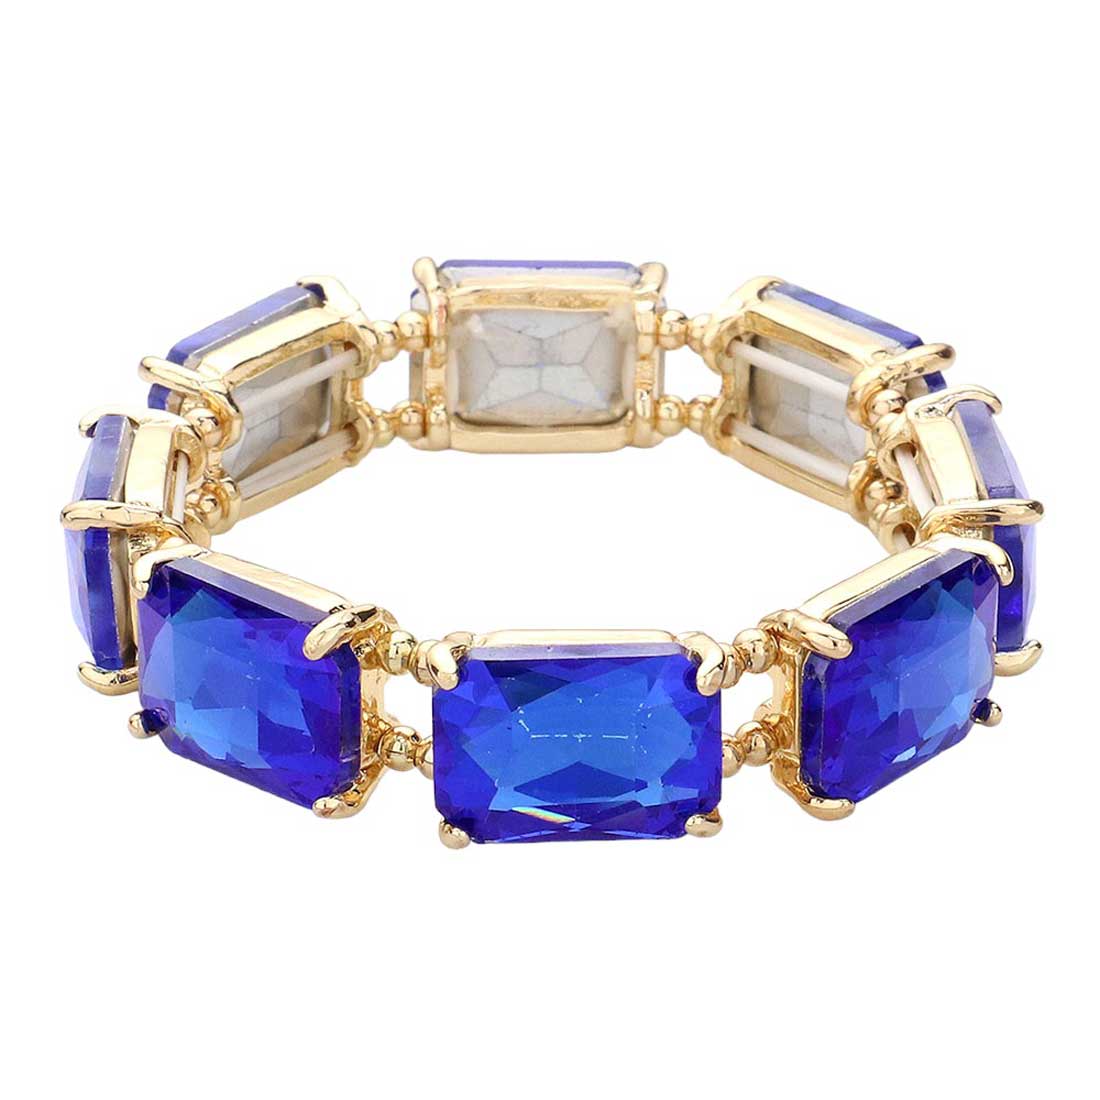 Royal Blue Emerald Cut Stone Stretch Evening Bracelet, get ready with this Stretch Evening Bracelet to receive the best compliments on any special occasion. Put on a pop of color to complete your ensemble and make you stand out on special occasions. It looks so pretty, bright, and elegant on any special occasion. 